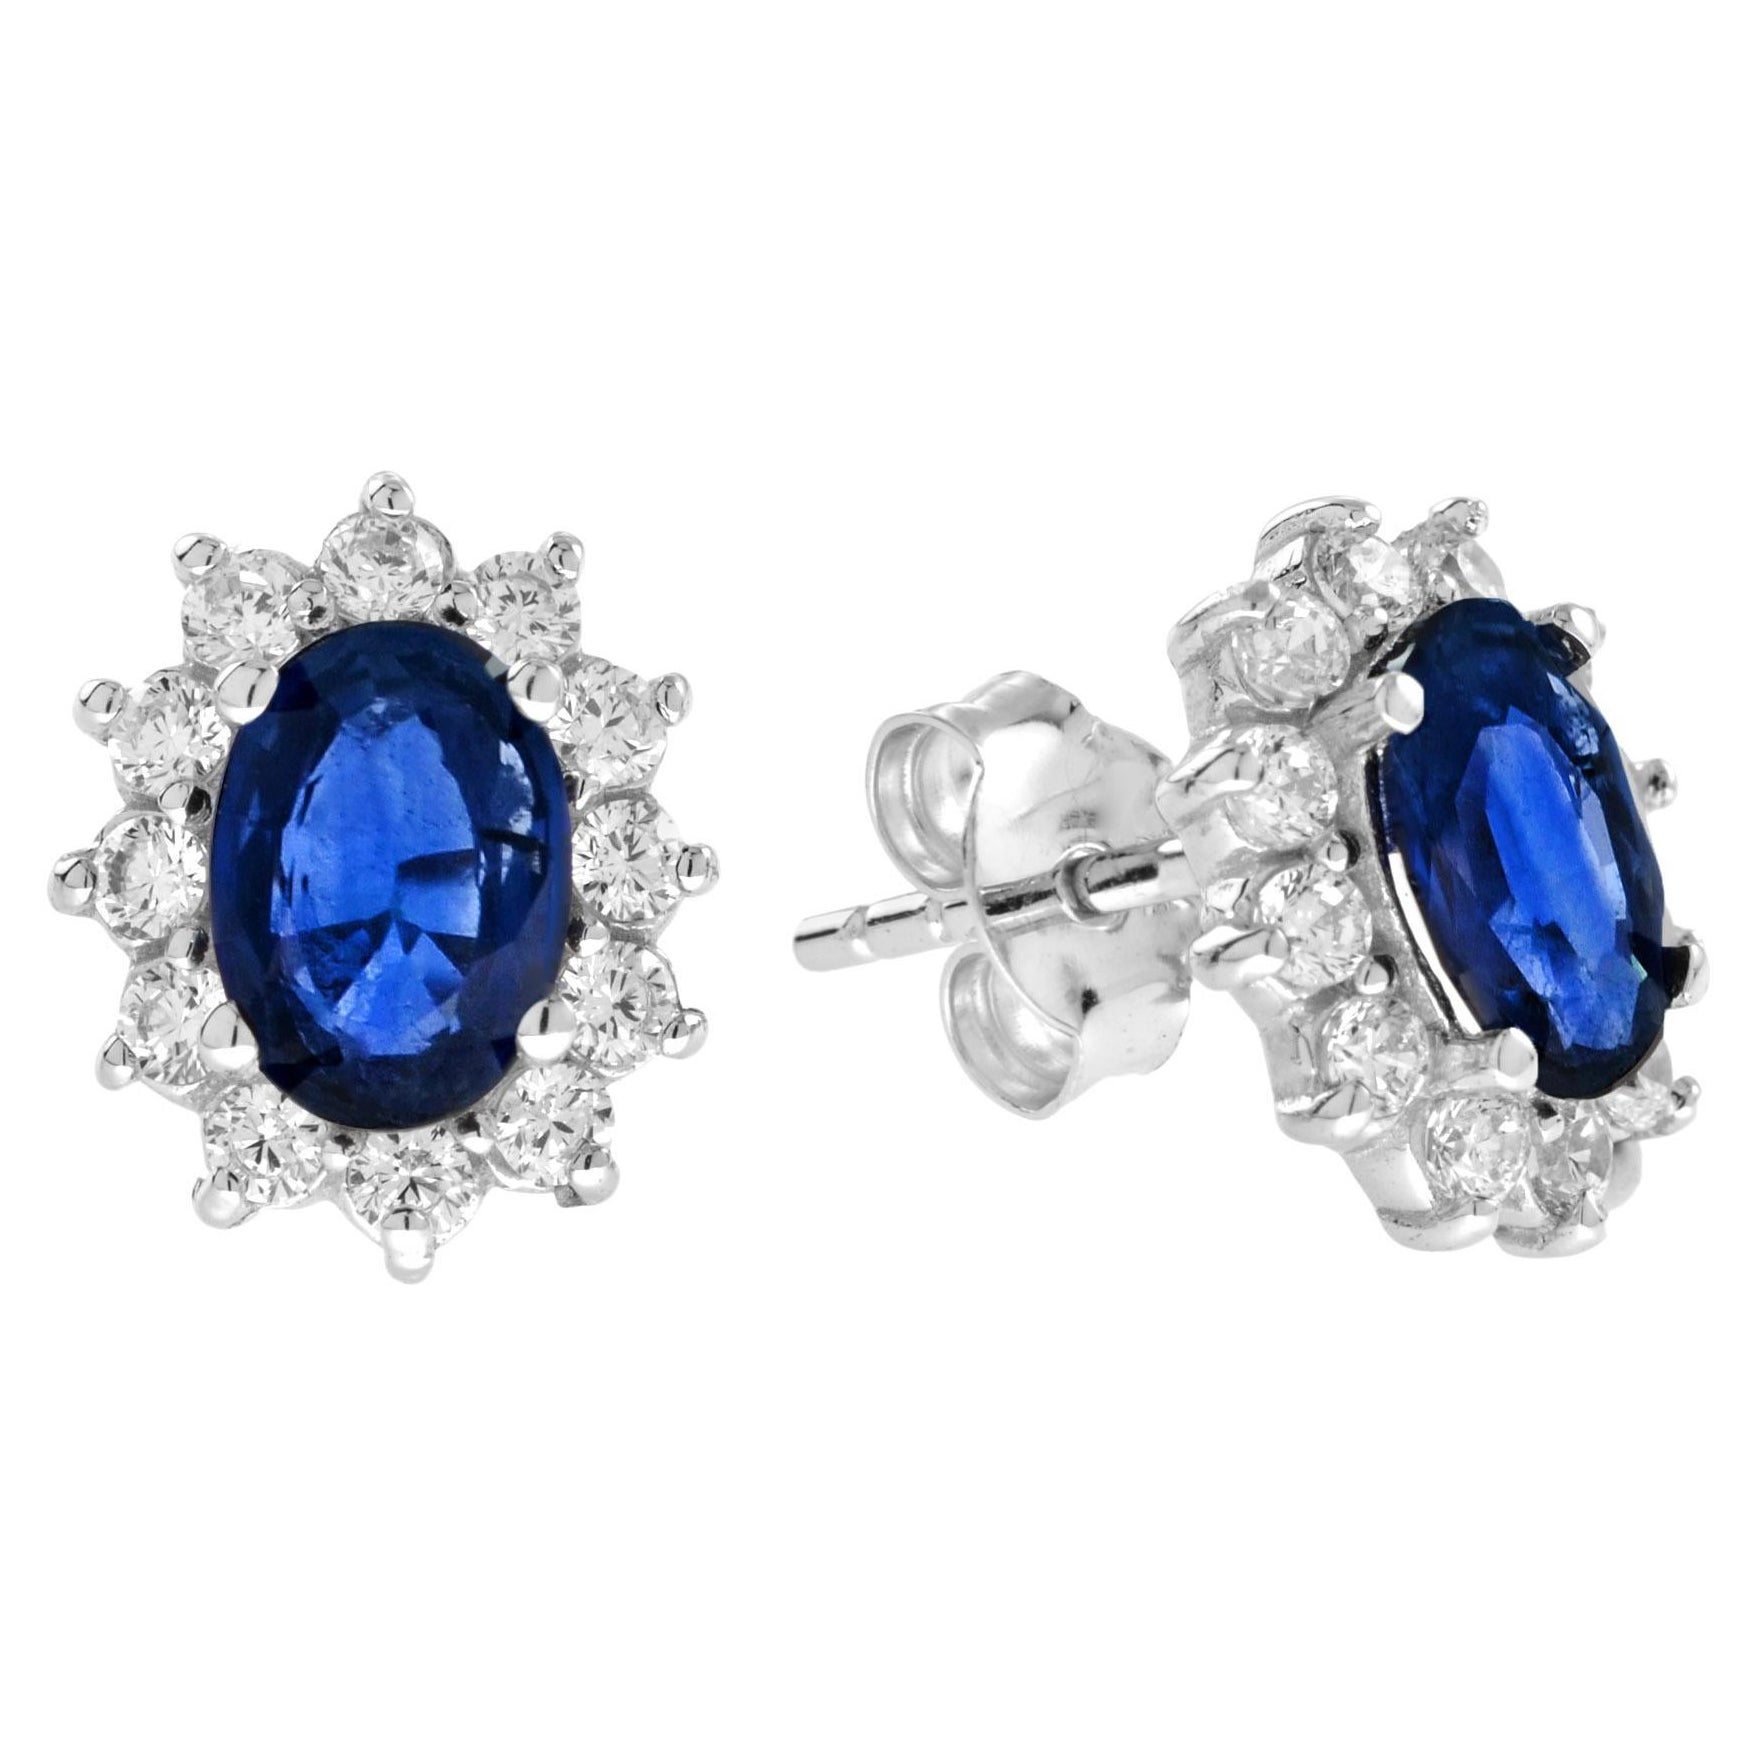 Oval Ceylon Sapphire and Diamond Cluster Earrings in 18k White Gold